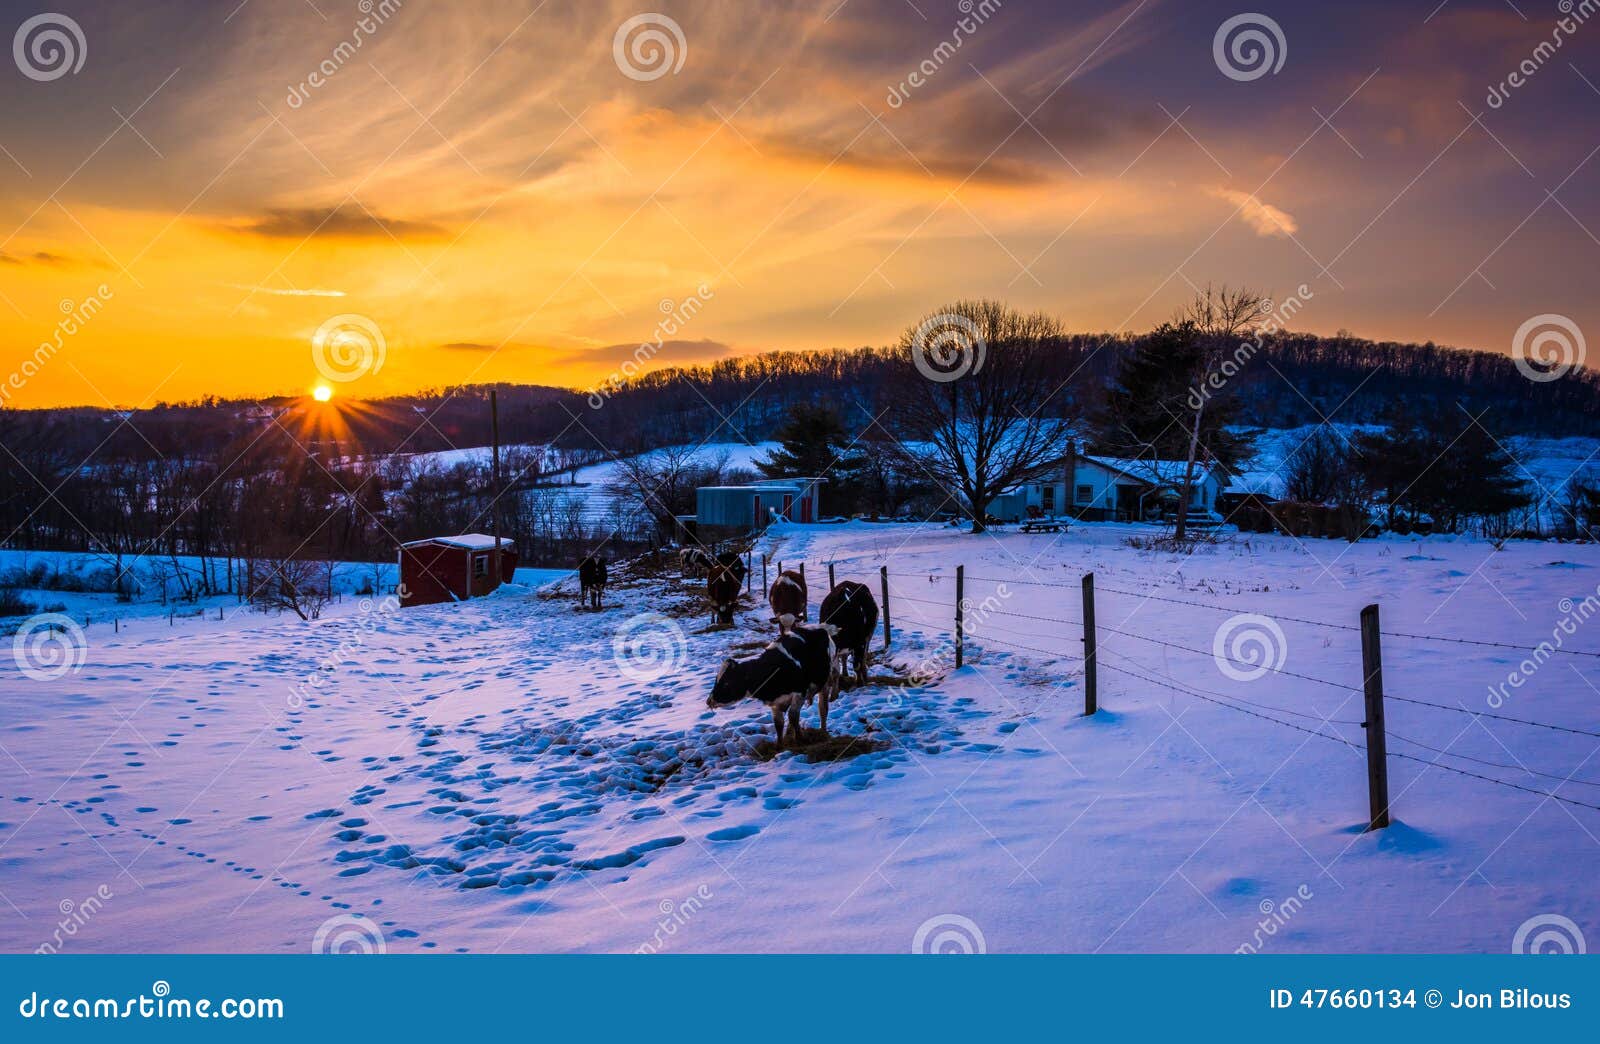 sunset over cows in a snow-covered farm field in carroll county